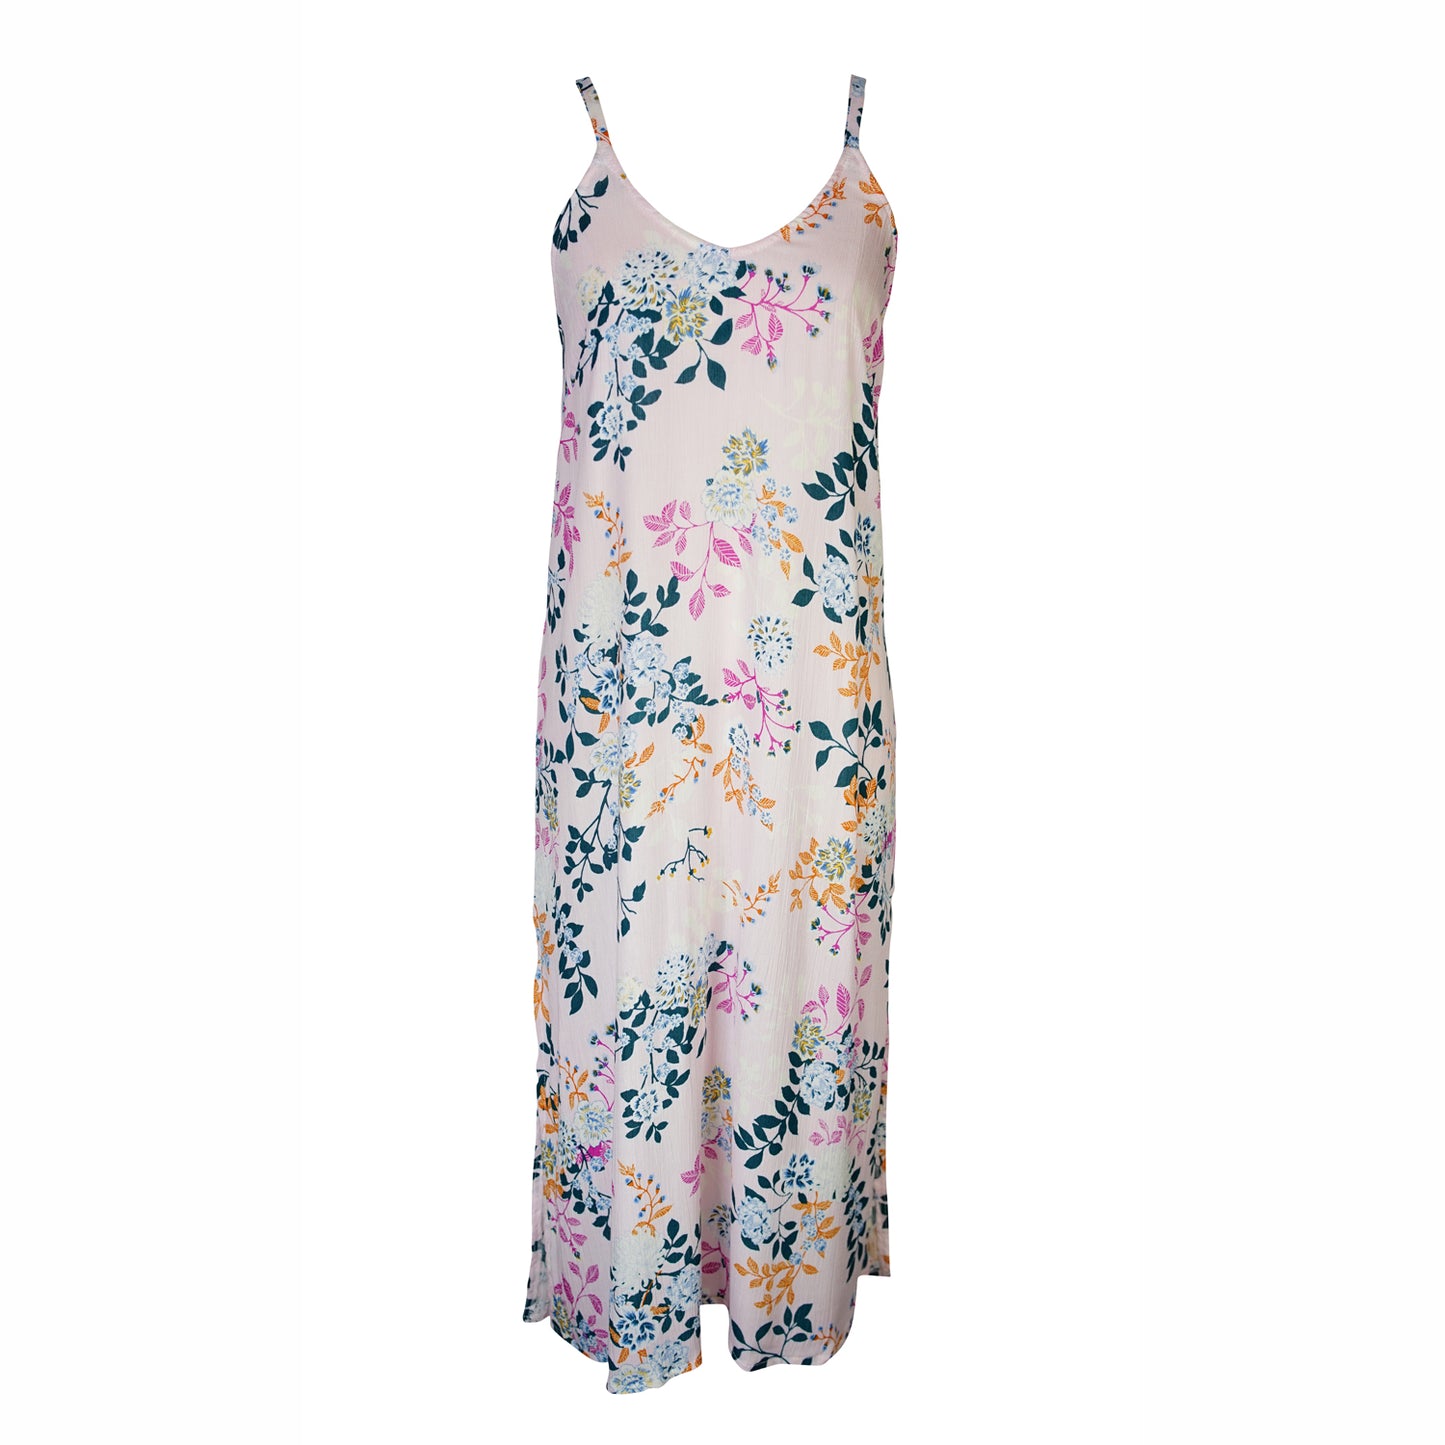 Midi slip dress with a soft blush base color, adorned with a floral pattern featuring shades of blue, pink, yellow, and green. The floral design is distributed evenly throughout, giving the dress a garden-like appearance. It features slender straps with a straight silhouette and relaxed fix, allowing for a beautiful drape and flowy movement. It's designed for a light, airy feel, suitable for warm weather or layered for cooler days.